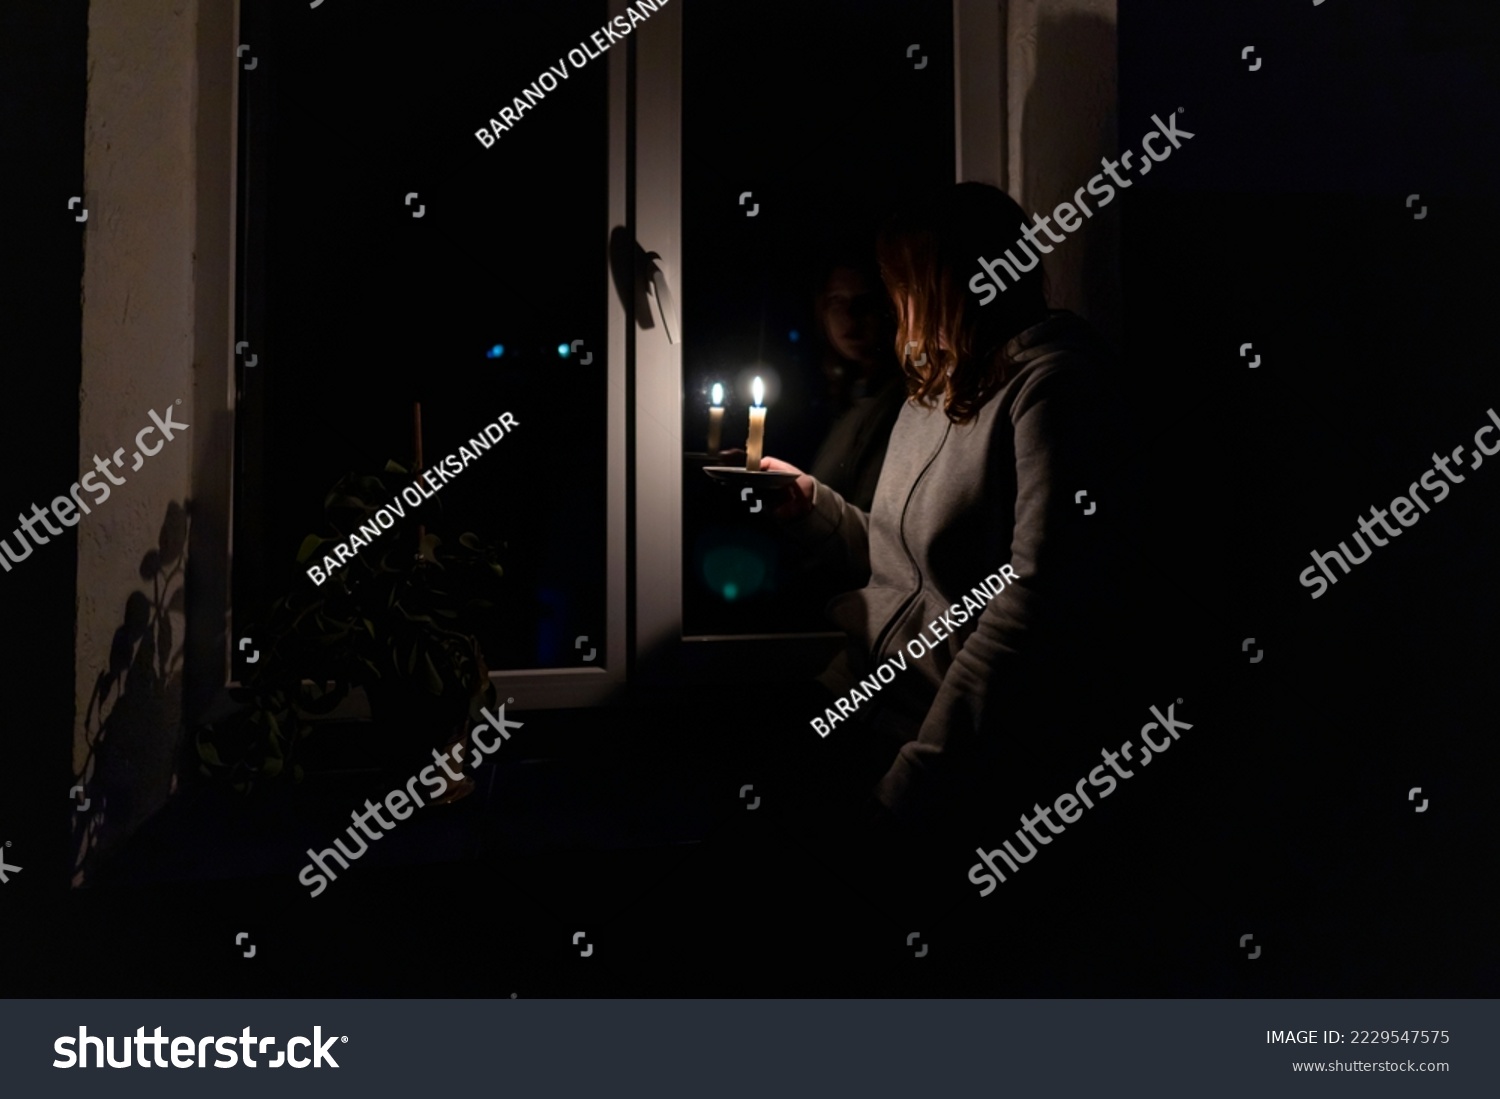 Blackout. Energy crisis. Destruction of infrastructure. Power outage concept. Girl with a burning candle in a dark room sits near the window #2229547575